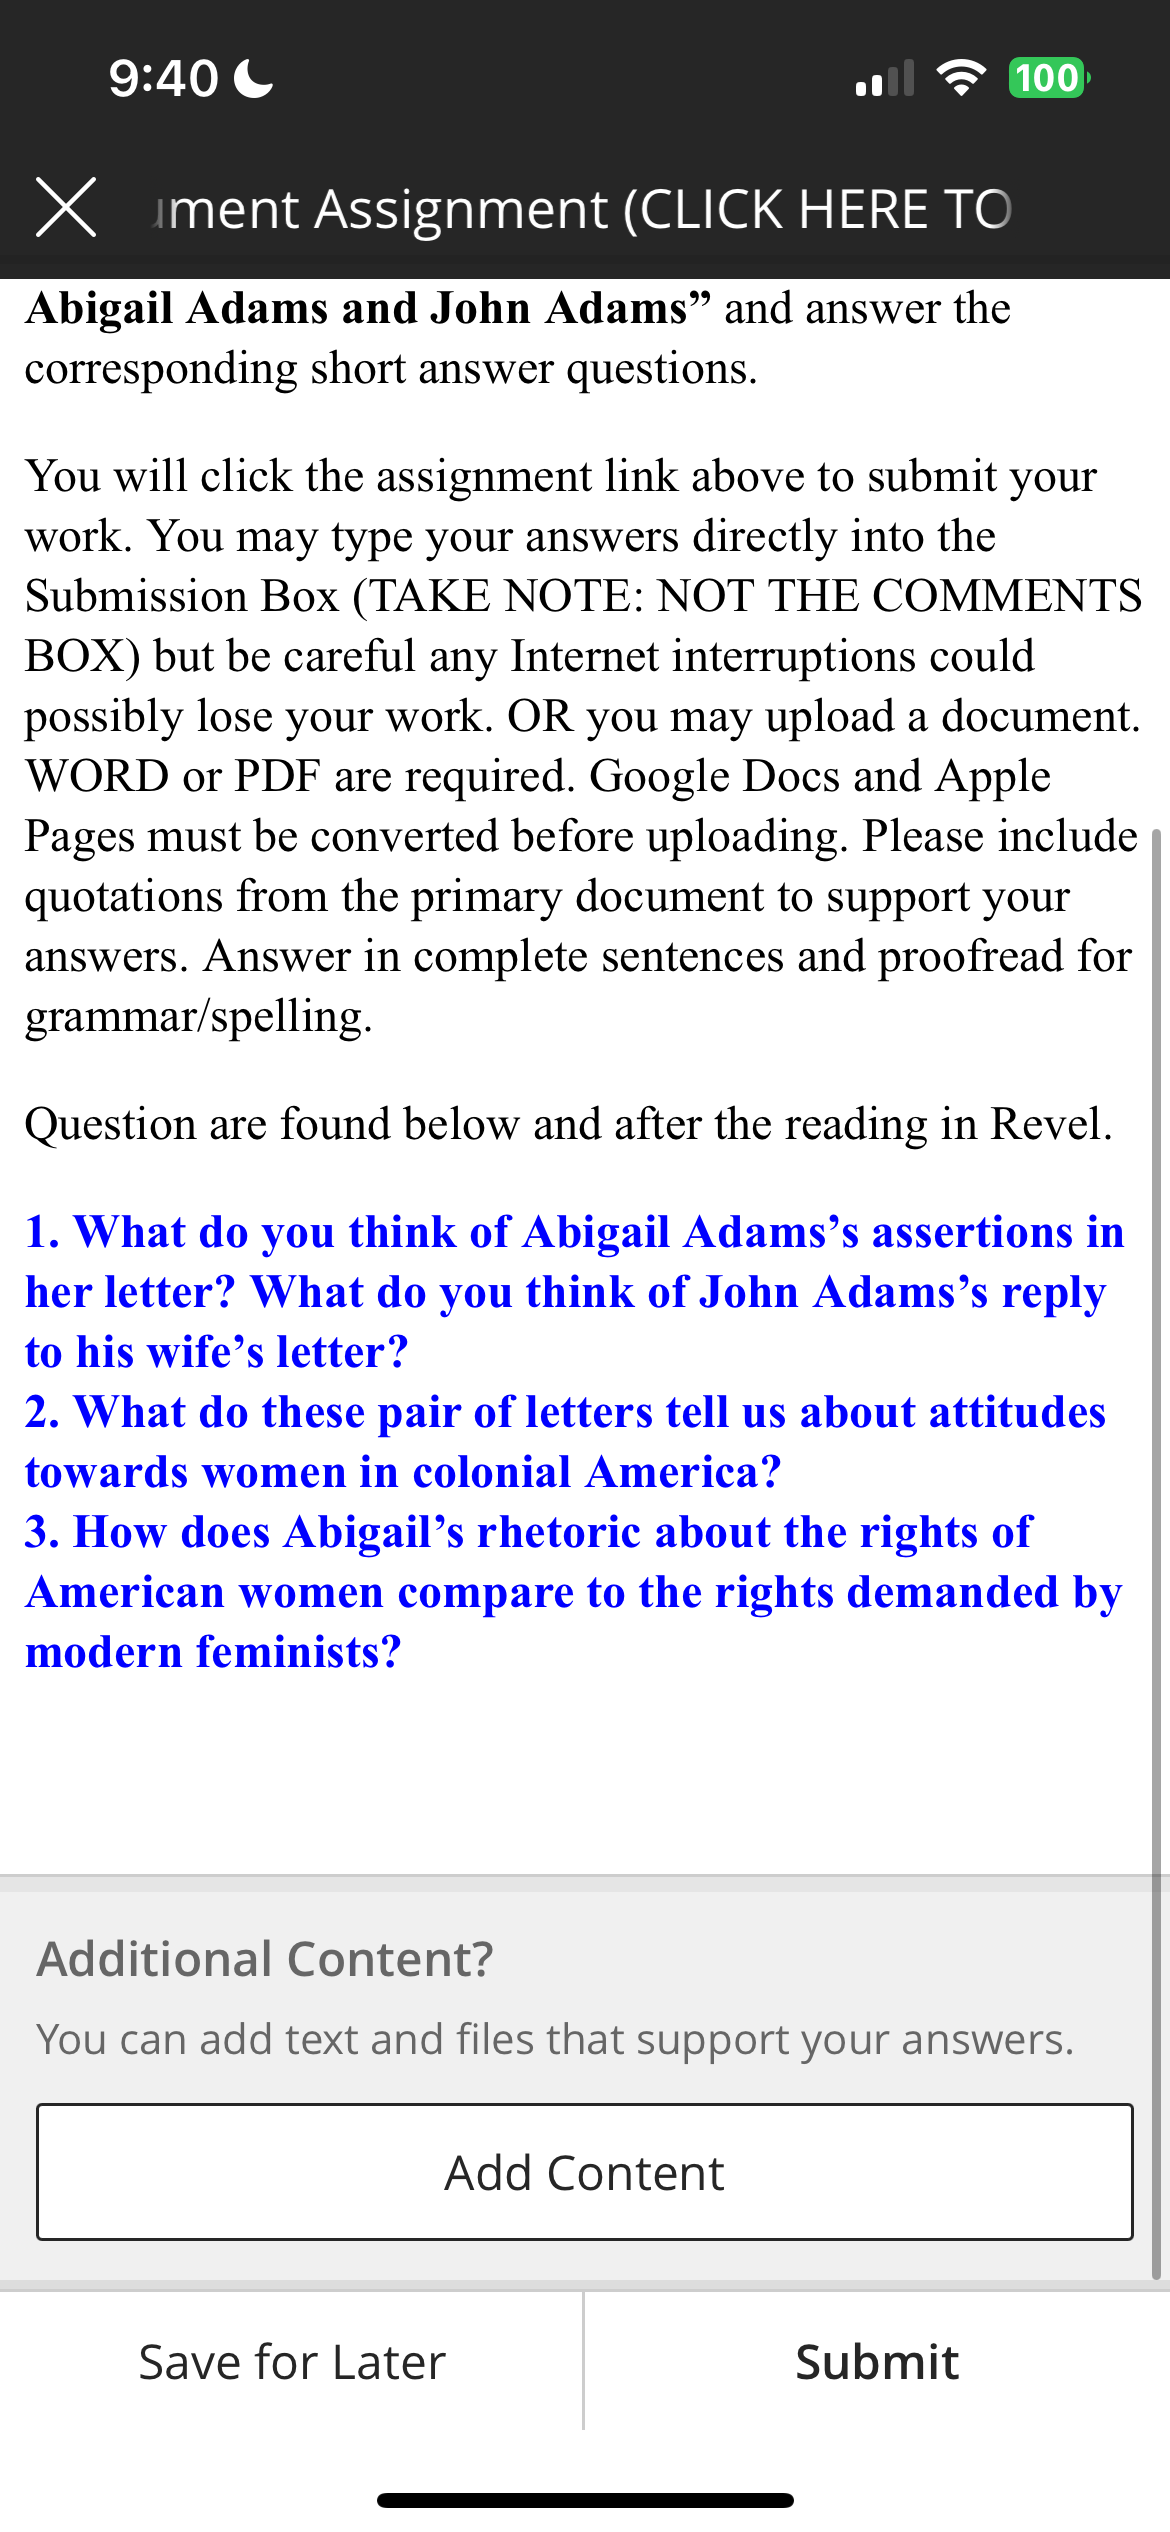 9:40
X ment Assignment (CLICK HERE TO
Abigail Adams and John Adams" and answer the
corresponding short answer questions.
You will click the assignment link above to submit your
work. You may type your answers directly into the
Submission Box (TAKE NOTE: NOT THE COMMENTS
BOX) but be careful any Internet interruptions could
possibly lose your work. OR you may upload a document.
WORD or PDF are required. Google Docs and Apple
Pages must be converted before uploading. Please include
quotations from the primary document to support your
answers. Answer in complete sentences and proofread for
grammar/spelling.
Question are found below and after the reading in Revel.
1. What do you think of Abigail Adams's assertions in
her letter? What do you think of John Adams's reply
to his wife's letter?
100
2. What do these pair of letters tell us about attitudes
towards women in colonial America?
3. How does Abigail's rhetoric about the rights of
American women compare to the rights demanded by
modern feminists?
Additional Content?
You can add text and files that support your answers.
Add Content
Save for Later
Submit